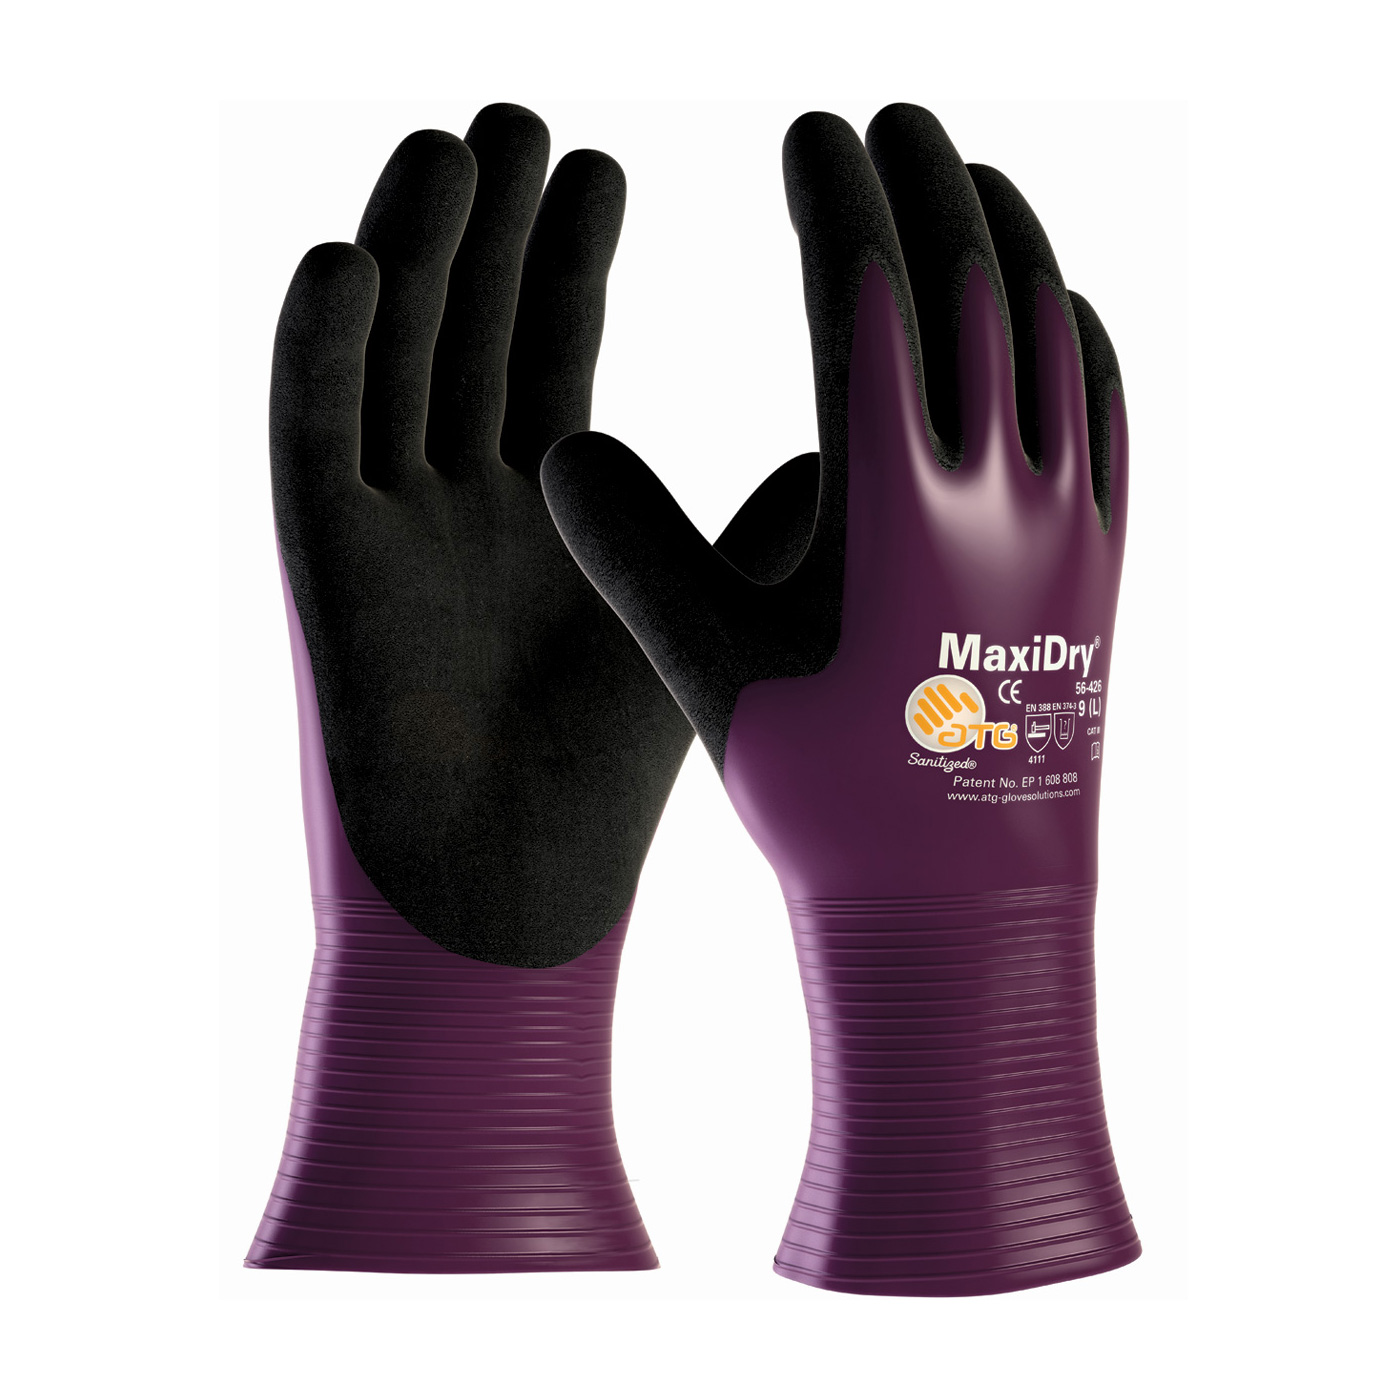 PIP 56-426/XXL MaxiDry Ultra Lightweight Nitrile Glove, Fully Dipped with Seamless Knit Nylon/Lycra Liner and Non-Slip Grip on Palm & Fingers - 2X-Large PID-56 426 XXL